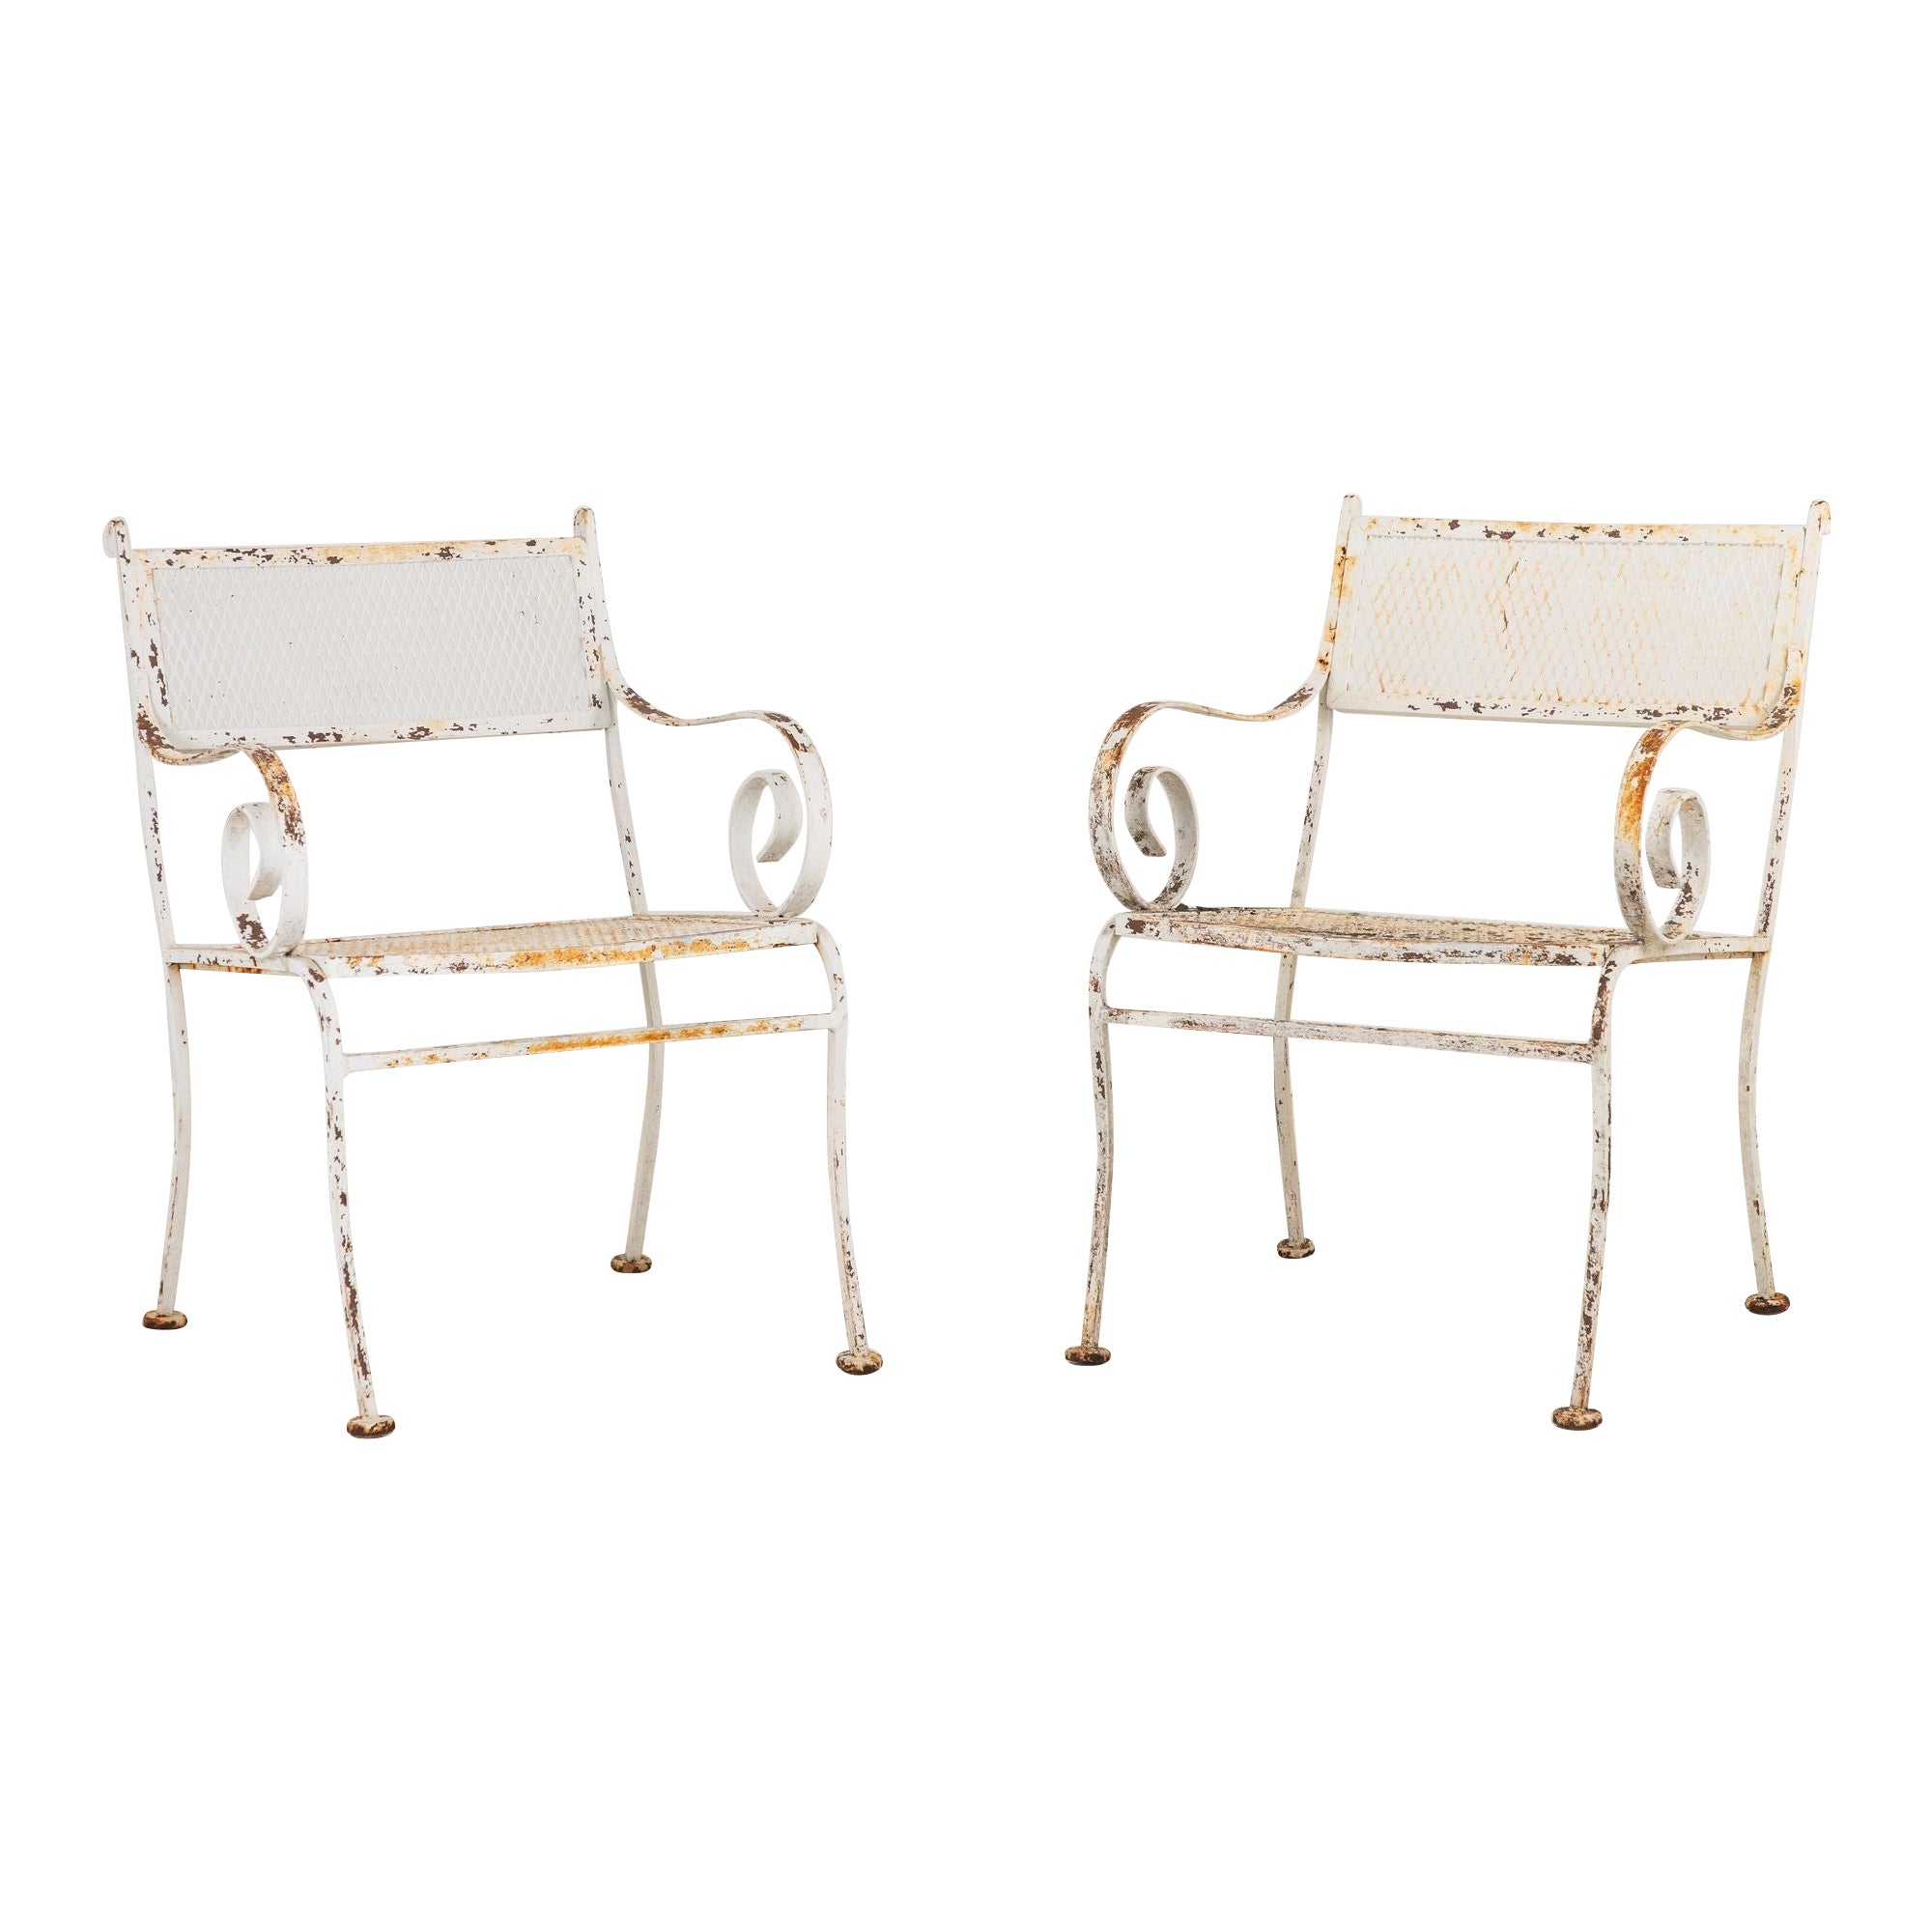 Pair White Painted Metal Garden Chairs, American mid 20th Century For Sale